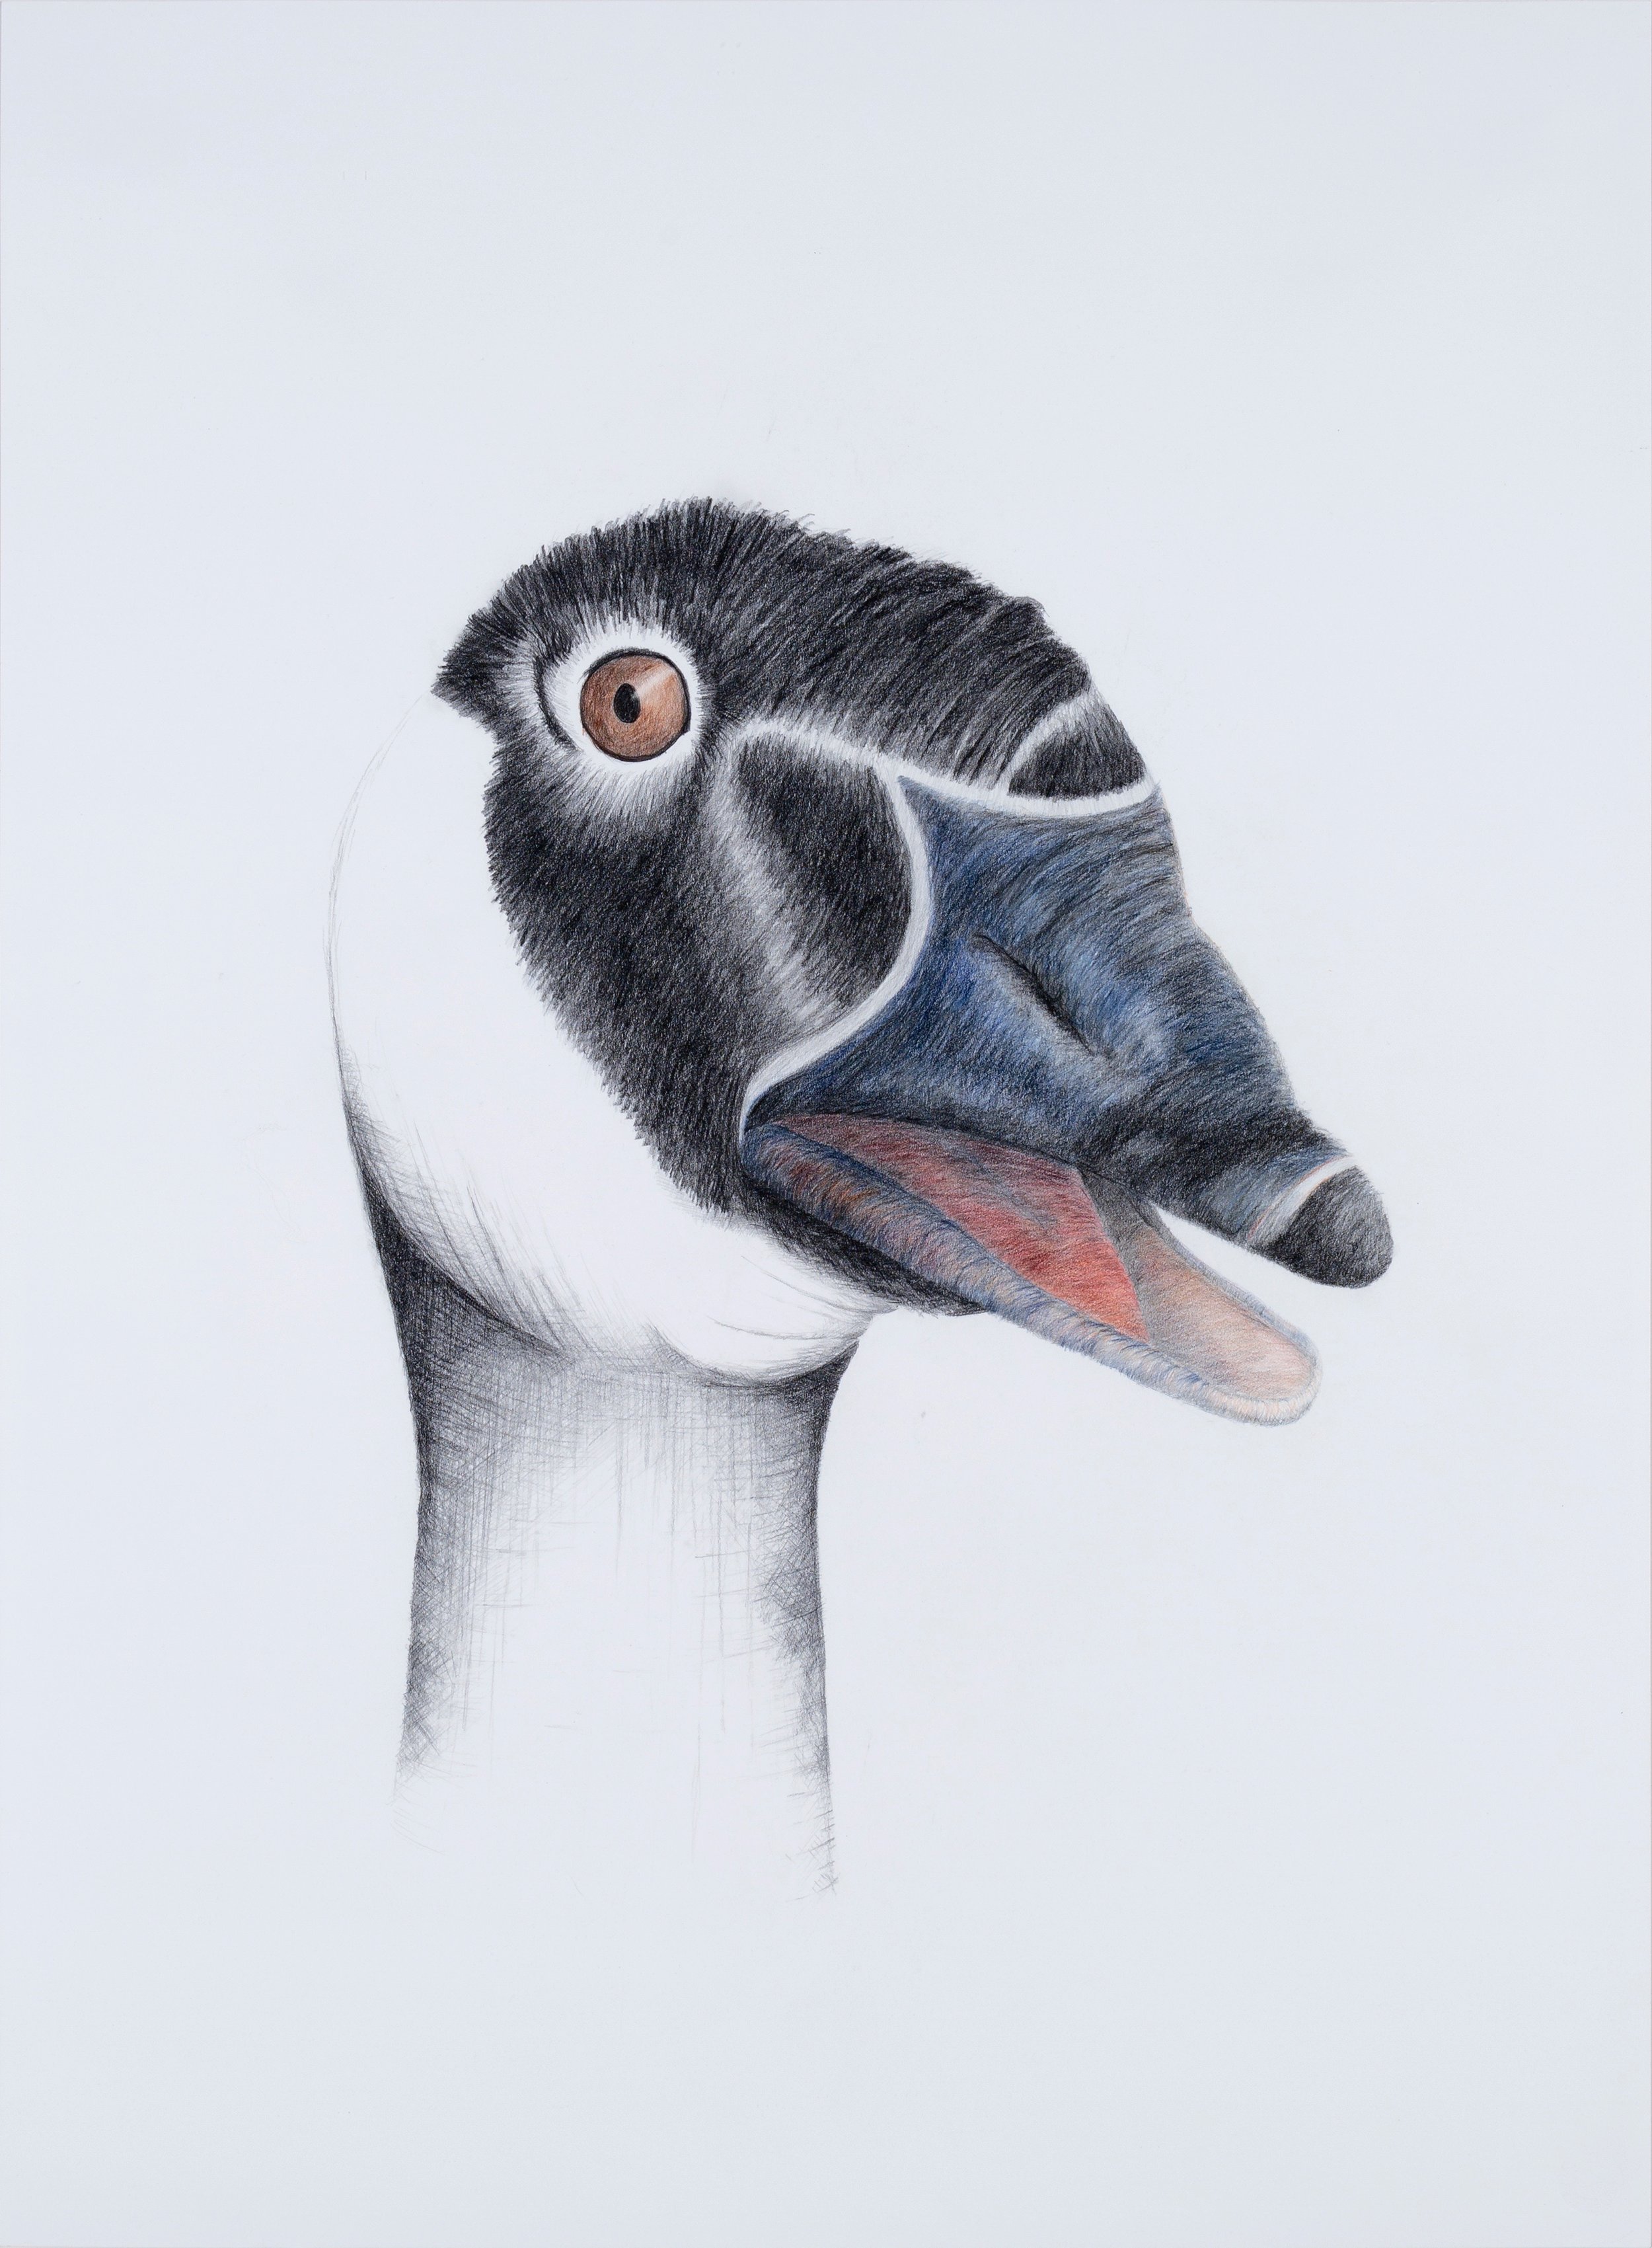   KEEPER OF MY SECRET: GOOSE   Graphite, colored pencil  35" x 26.5" 